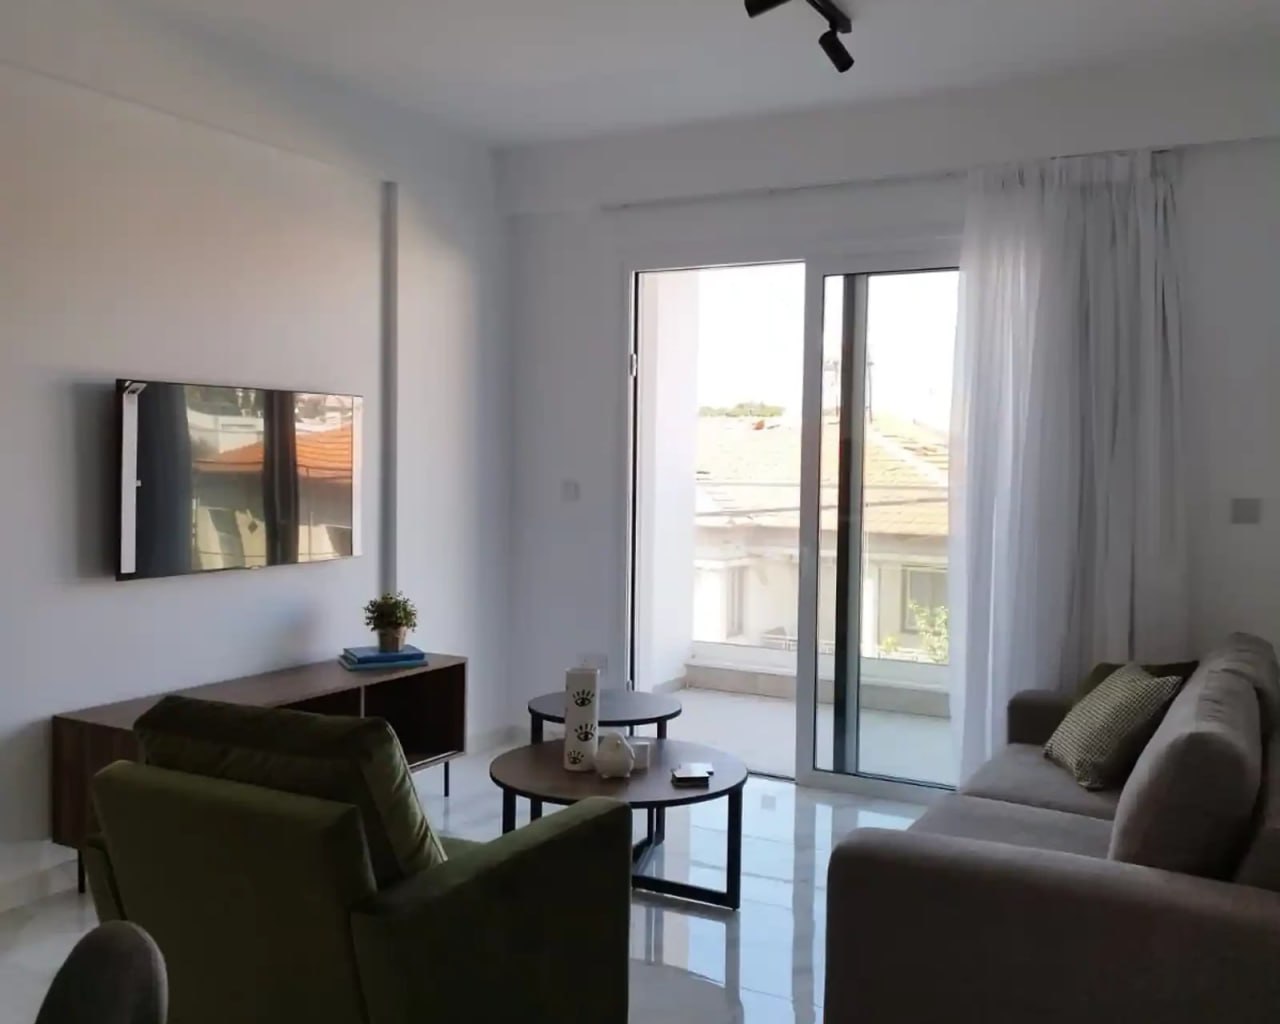 1 Bedroom House for Rent in Limassol District